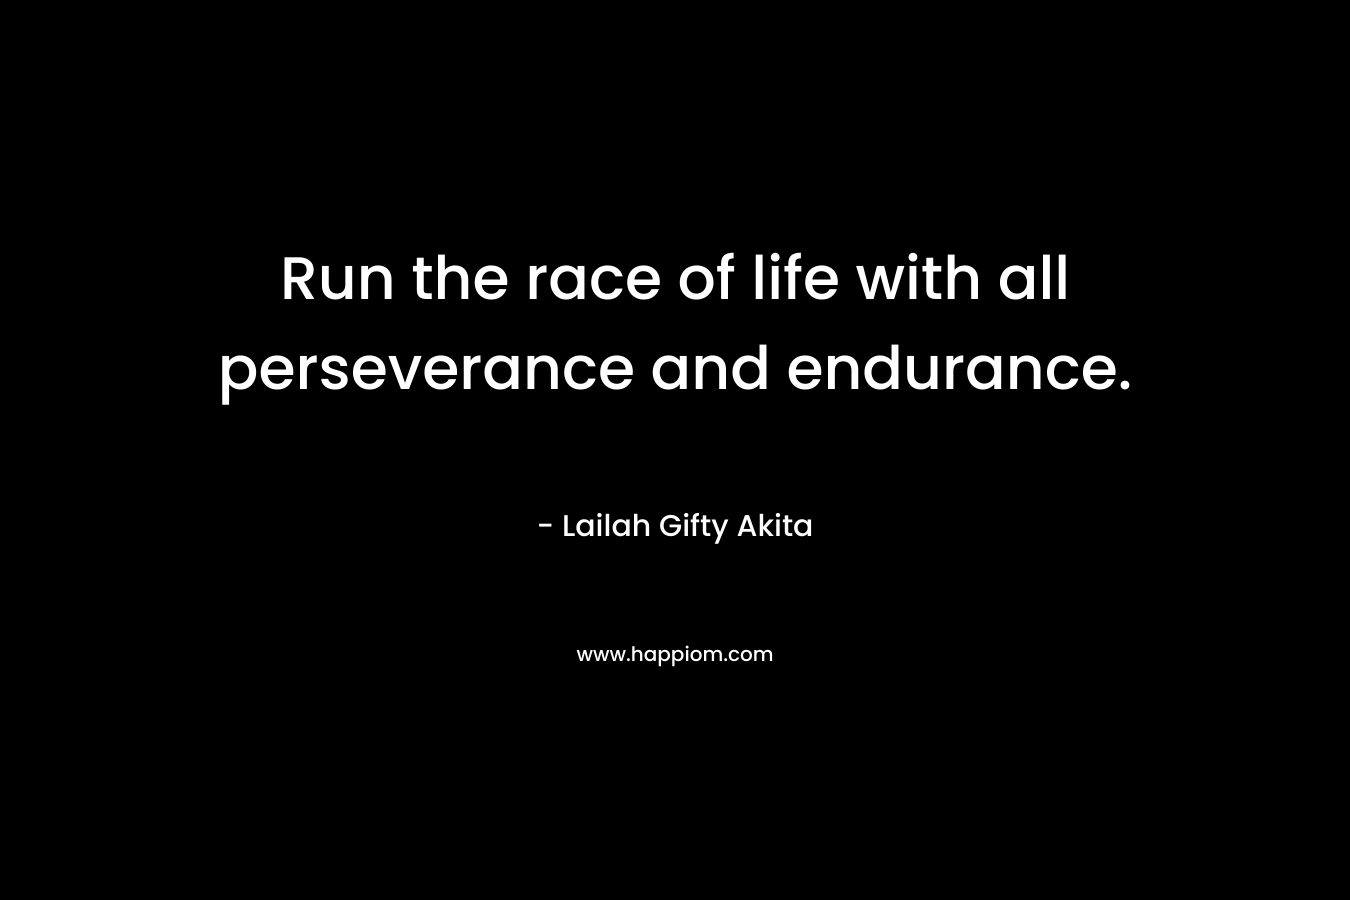 Run the race of life with all perseverance and endurance.